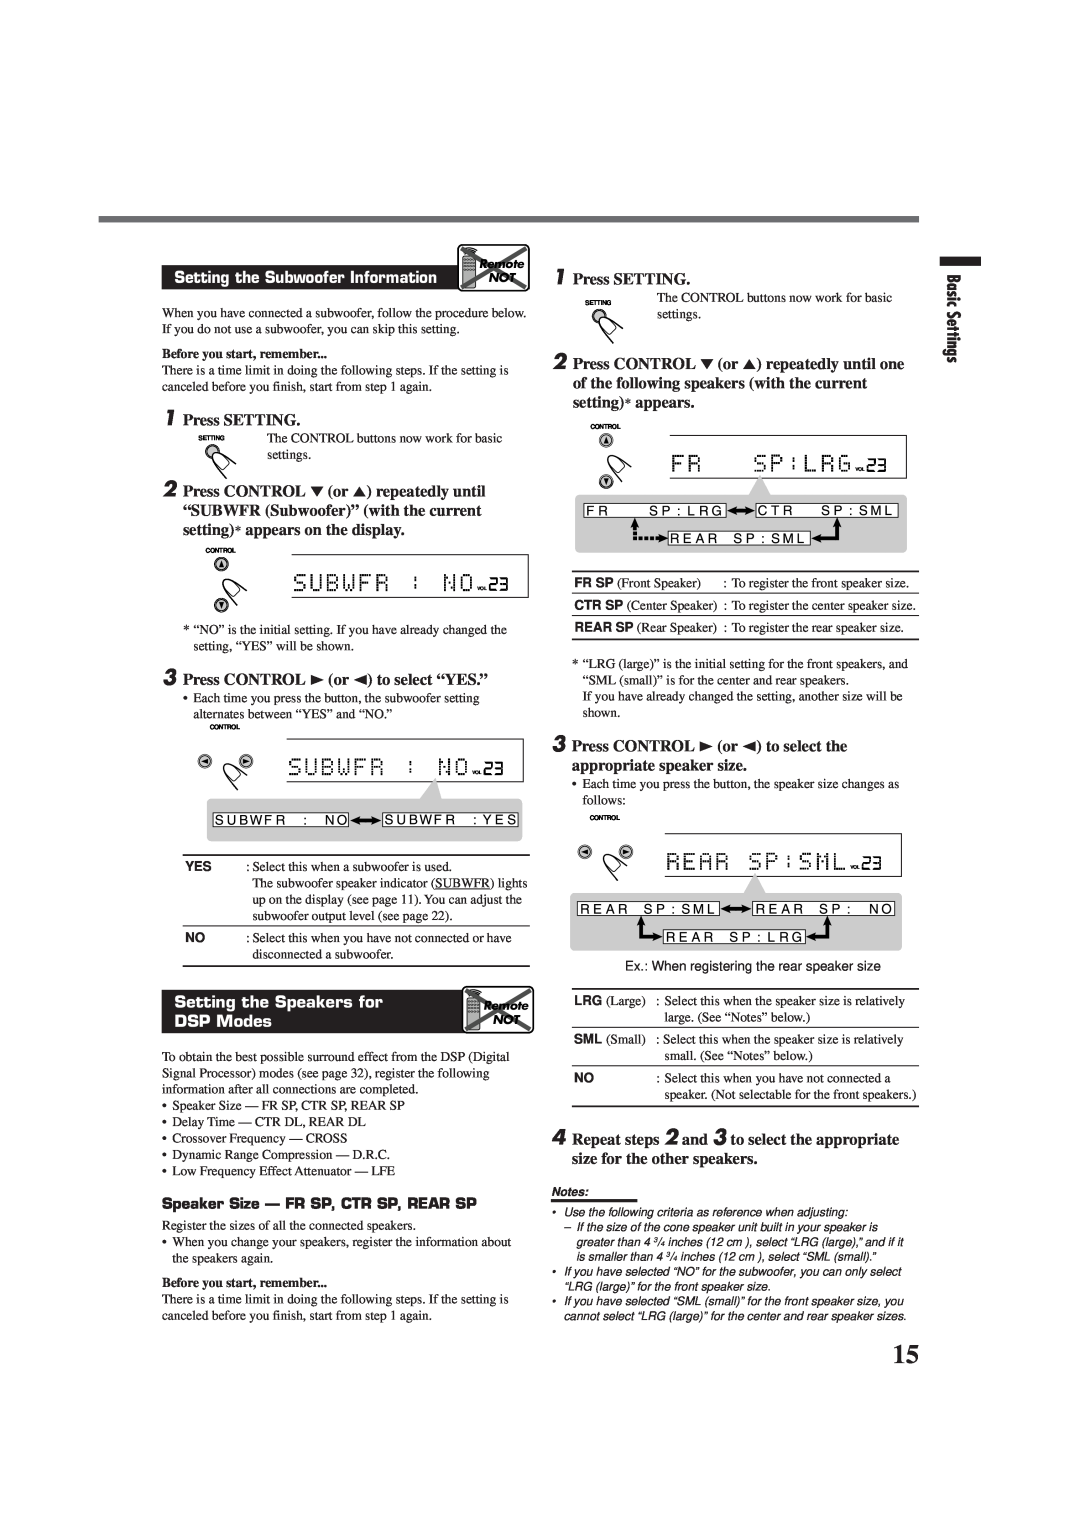 JVC RX-E100RSL manual Basic Settings, Setting the Subwoofer Information, setting* appears on the display, DSP Modes 